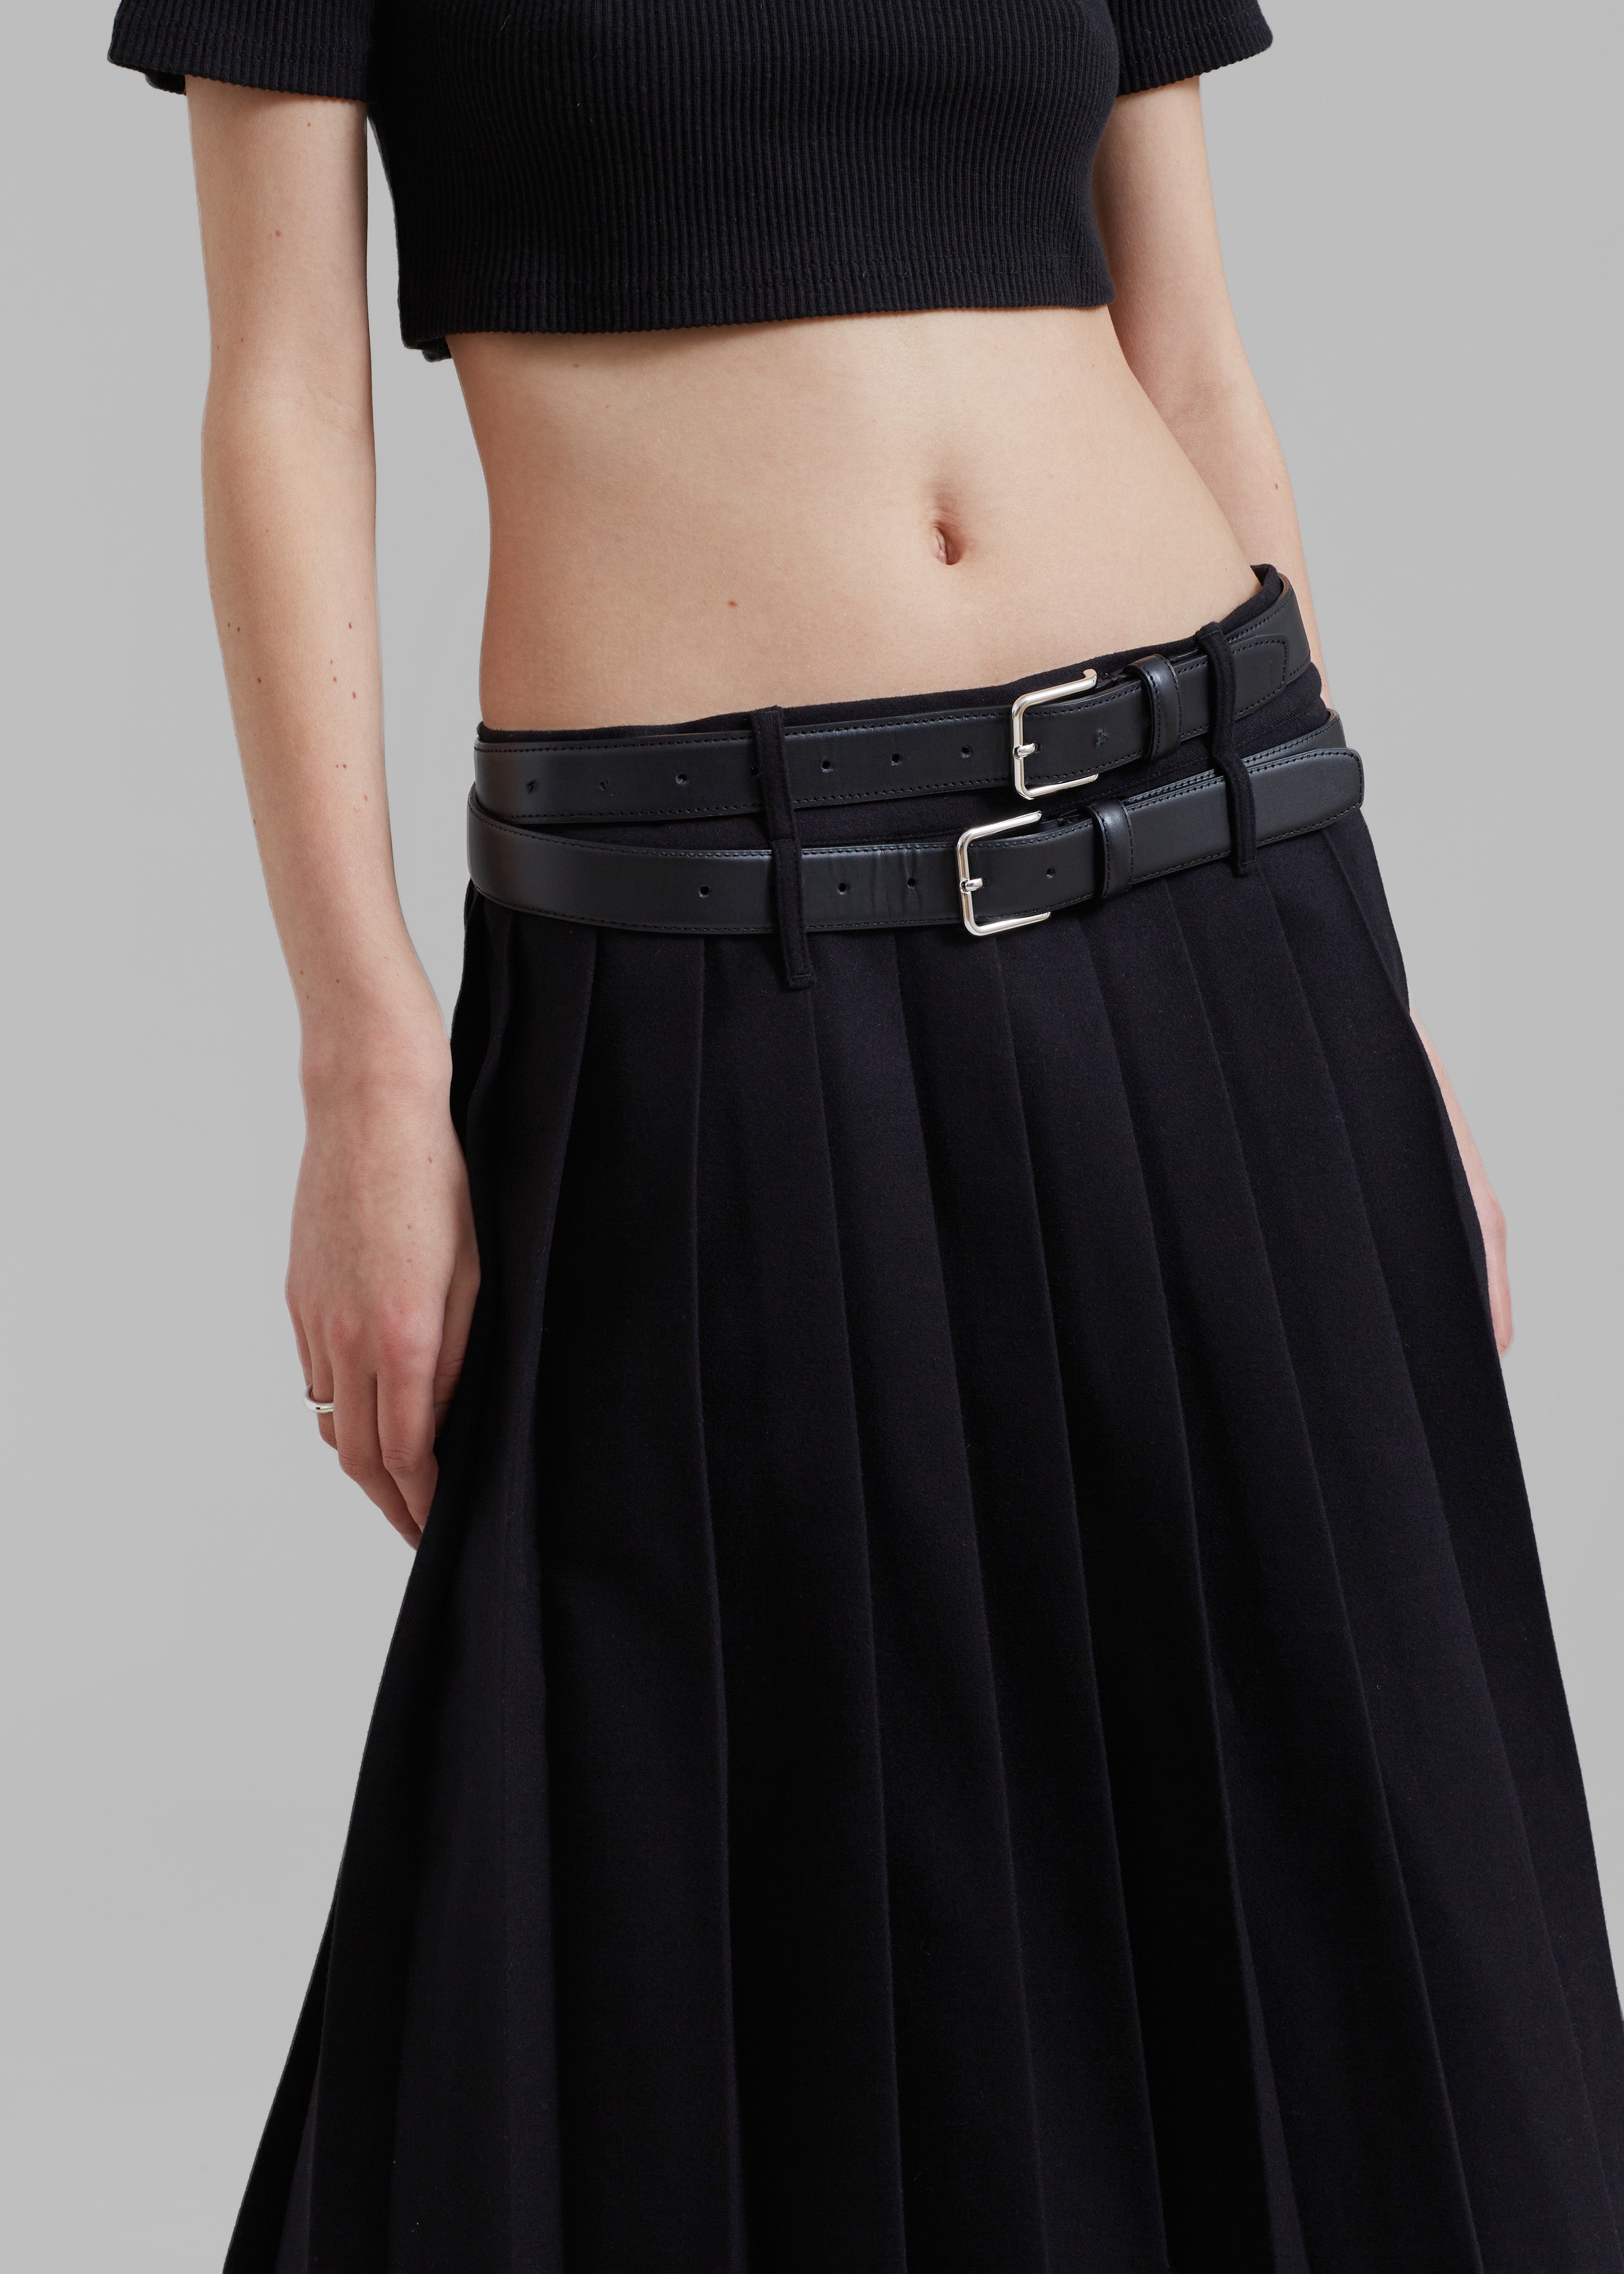 Wednesday Belted Pleated Skirt - Black - 2